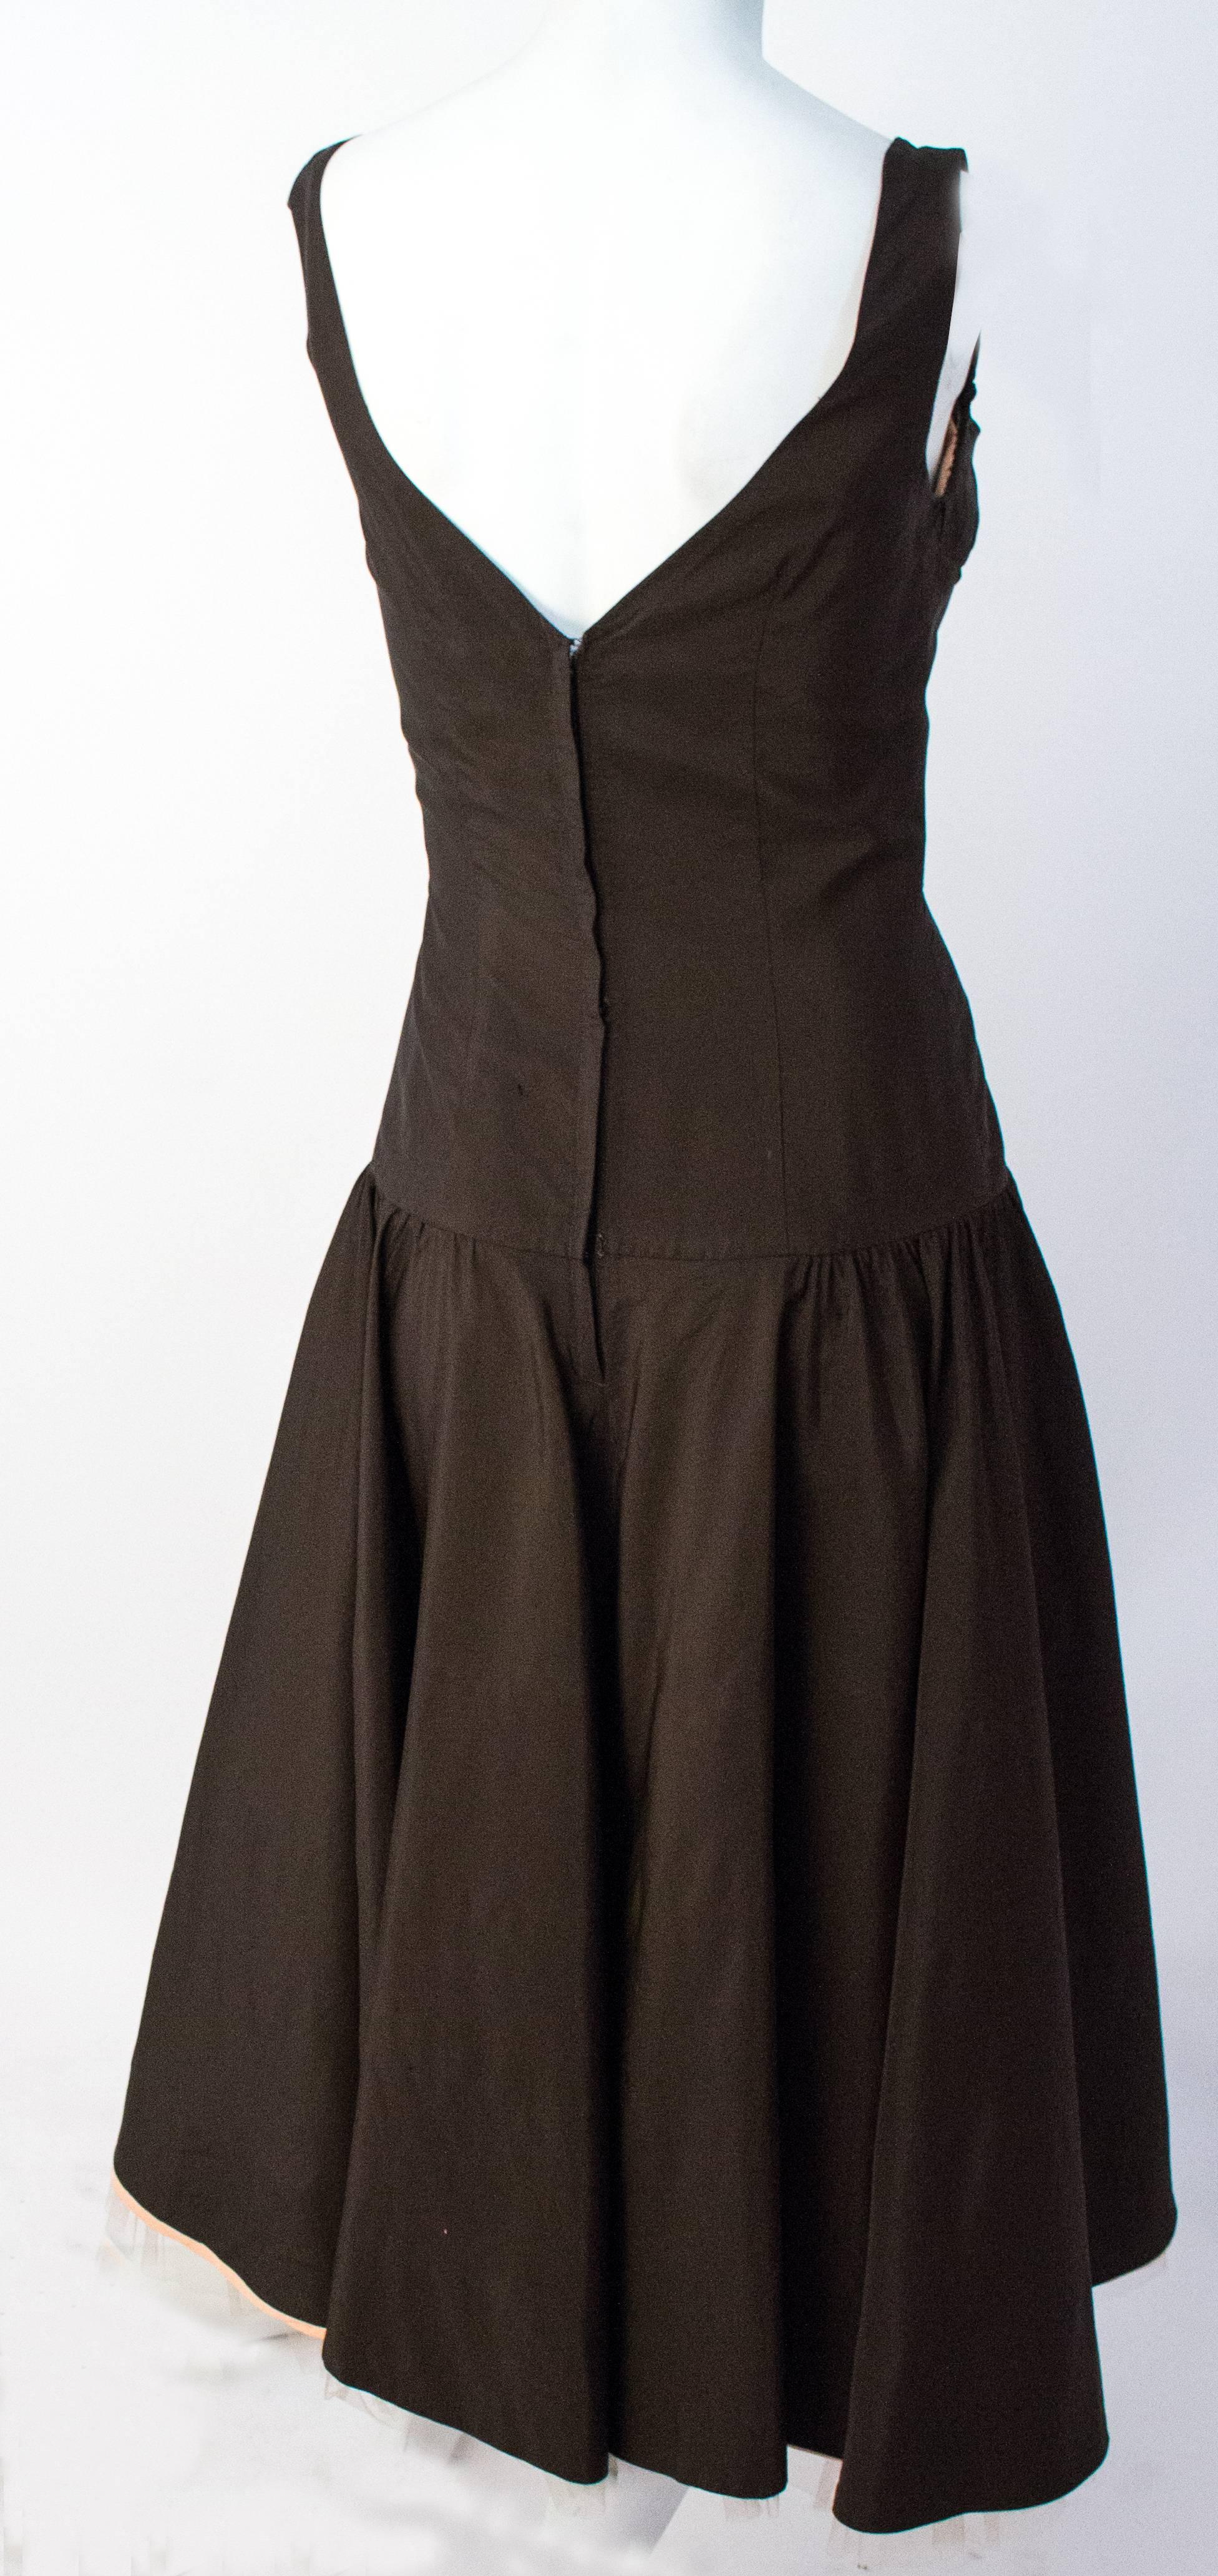 50s Chocolate Brown Party Dress with Pale Pink Tulle Ruffle Detail. Unlined. This dress is wearable but has some very small holes in the back of the skirt.